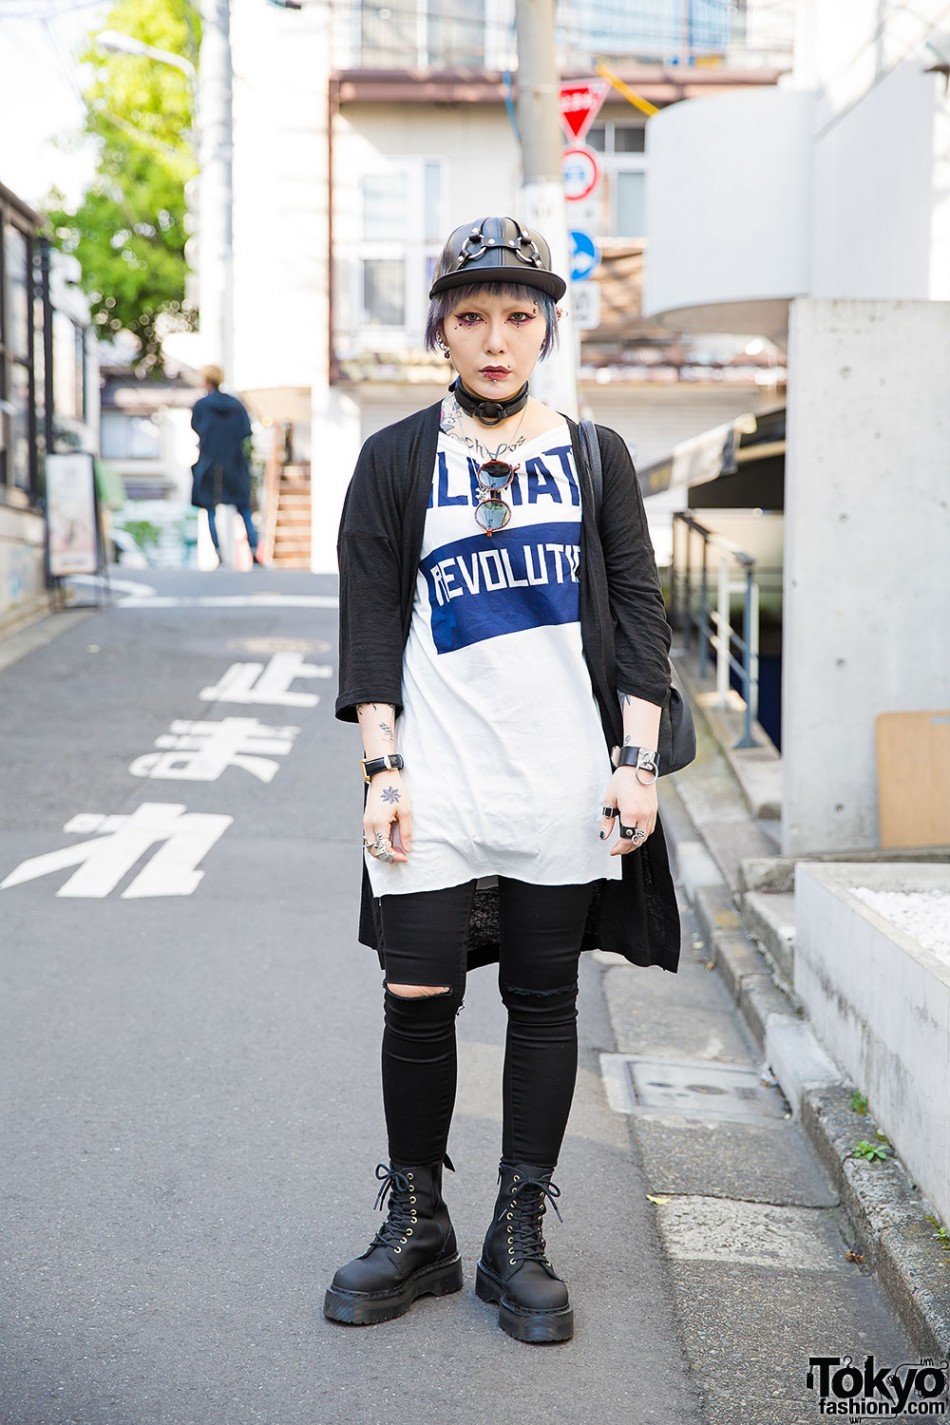 Blue-Haired Harajuku Girl w/ Piercings & Tattoos, Worlds End, Vivienne ...